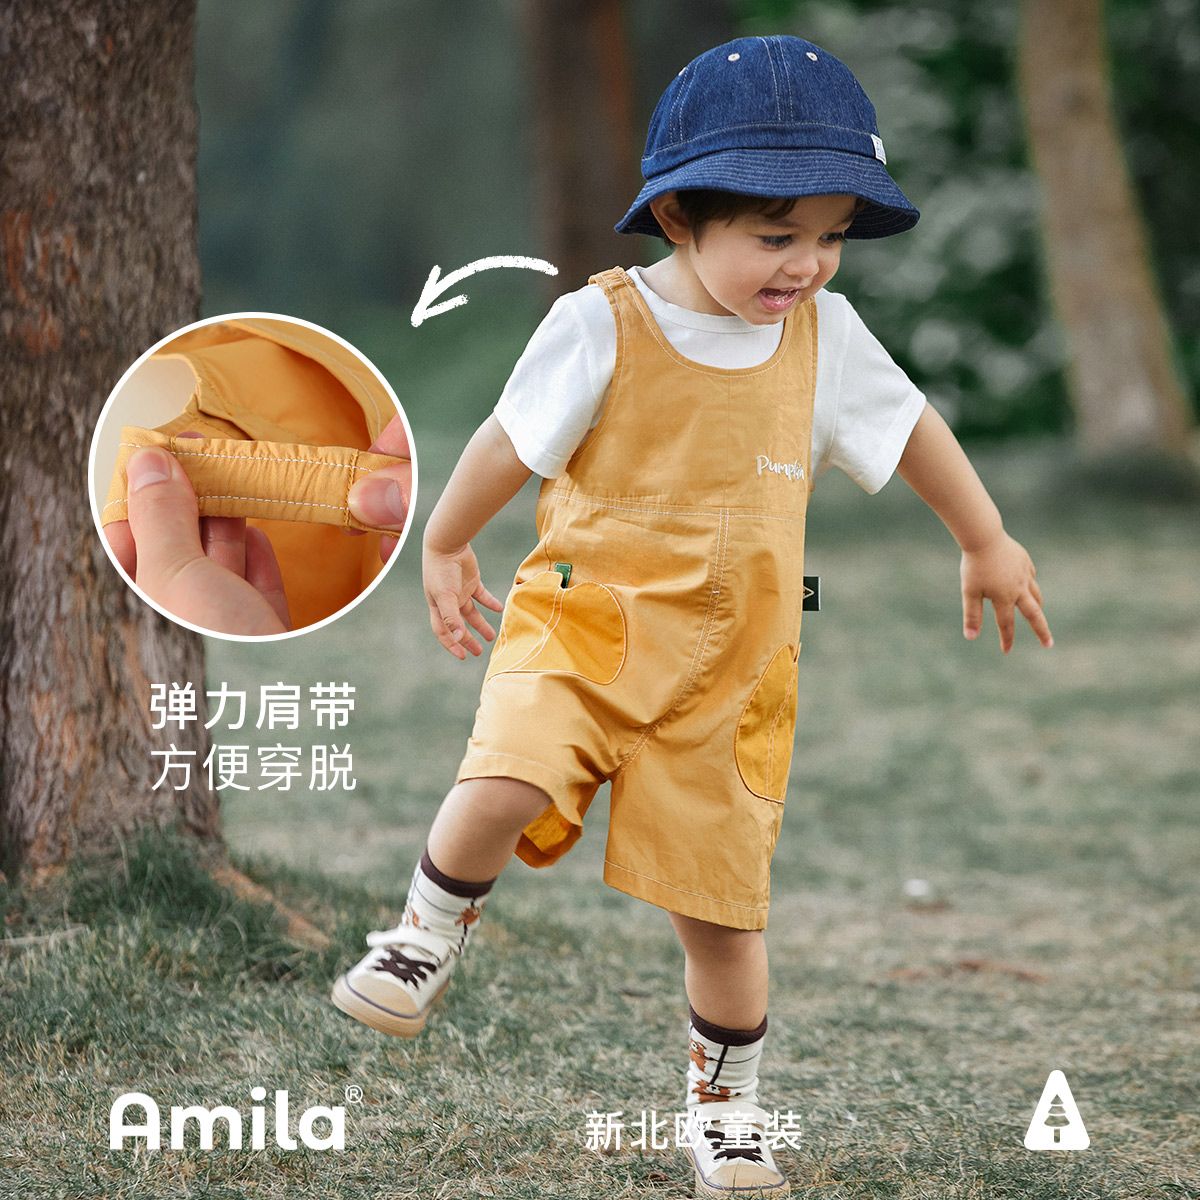 Amila boy and girl suit 2022 summer new pumpkin series children's baby T-shirt + overalls two-piece trendy